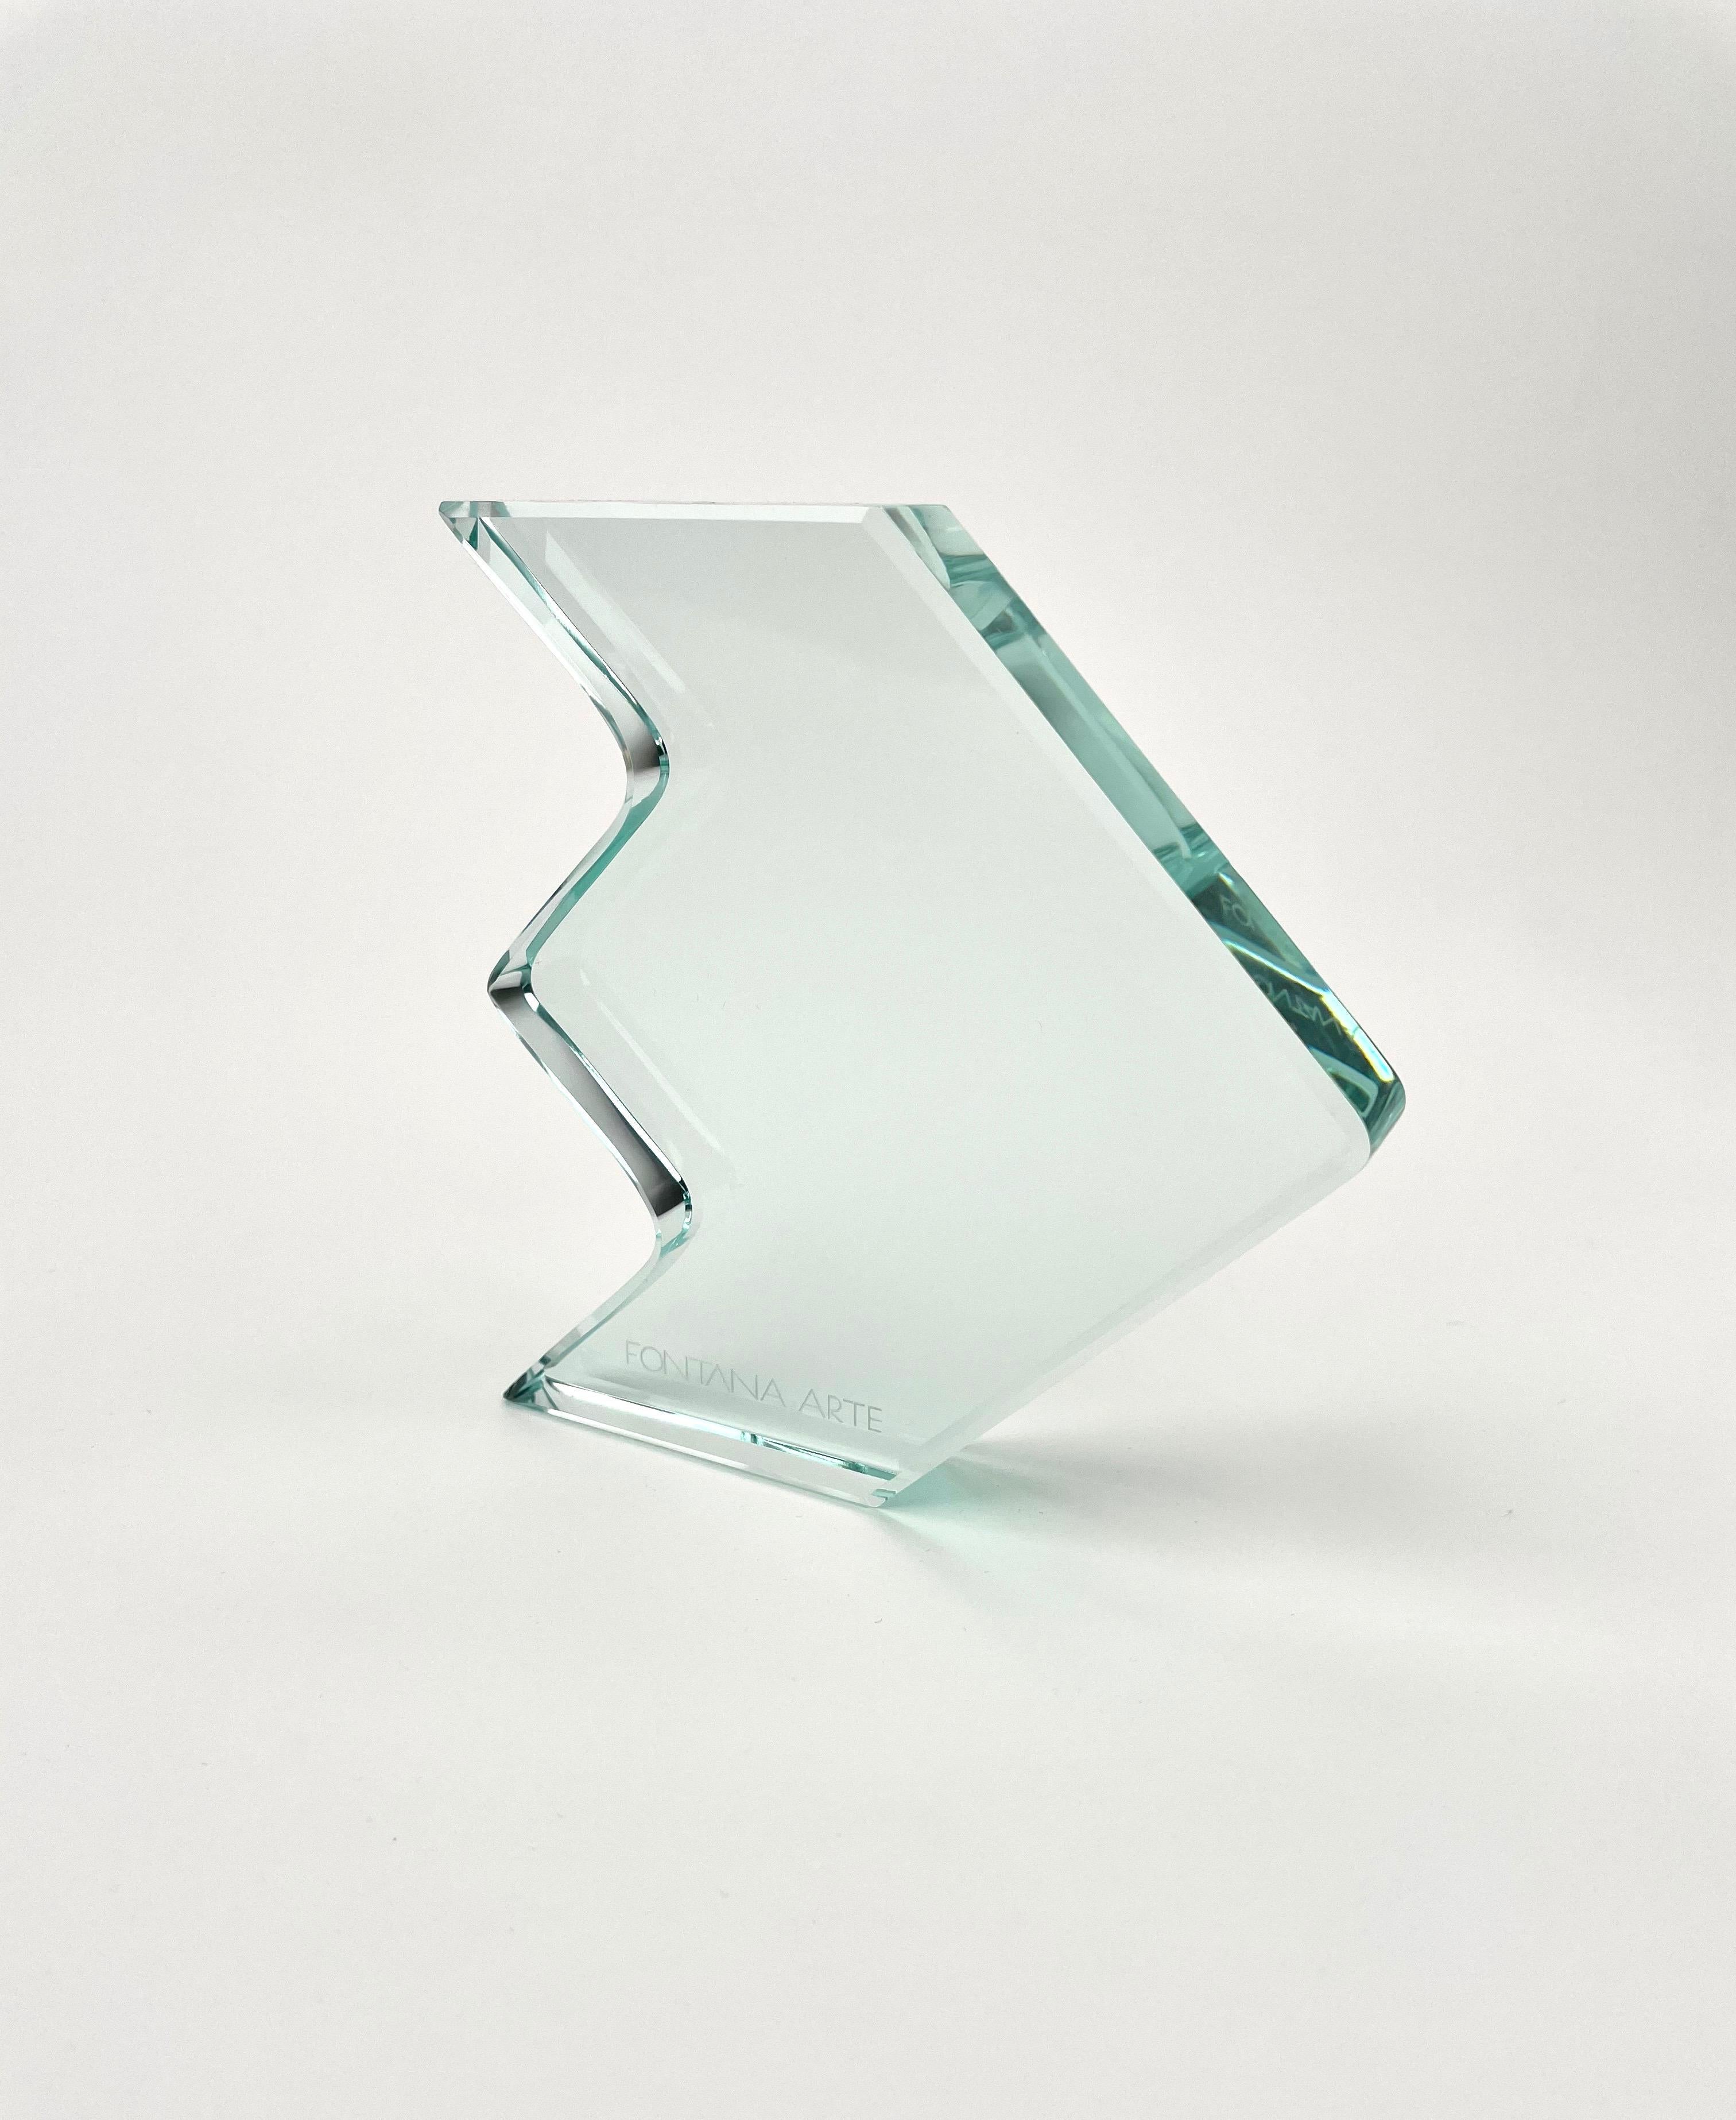 1970s Crystal Paperweight Sculpture by Fontana Arte for ISTUD, Italy For Sale 4